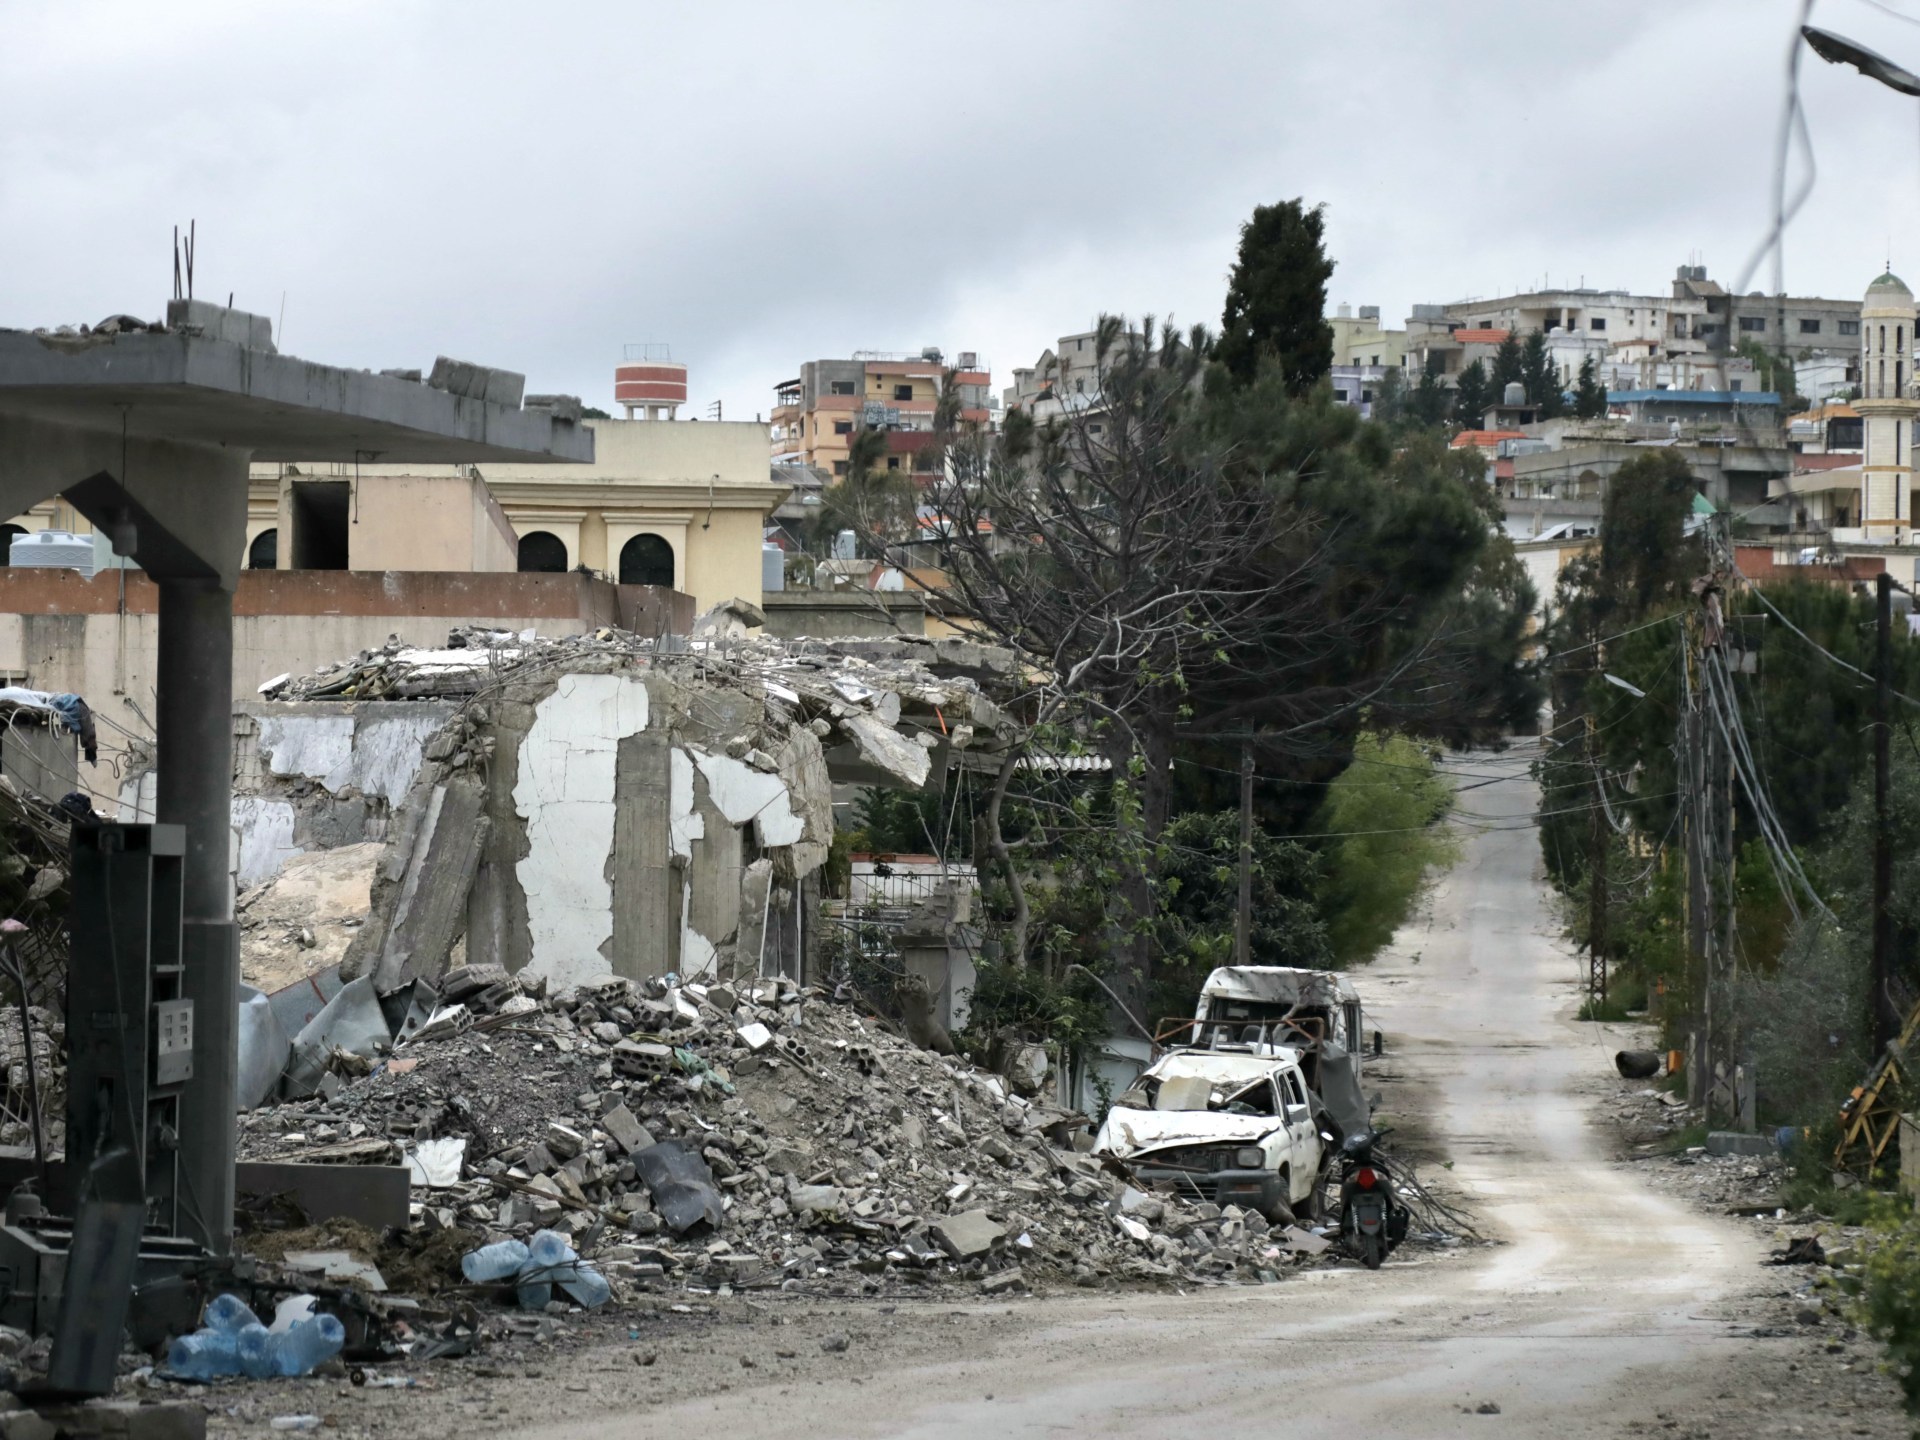 Cross-border fighting with Israel leaves Lebanese towns in ruins | Hezbollah